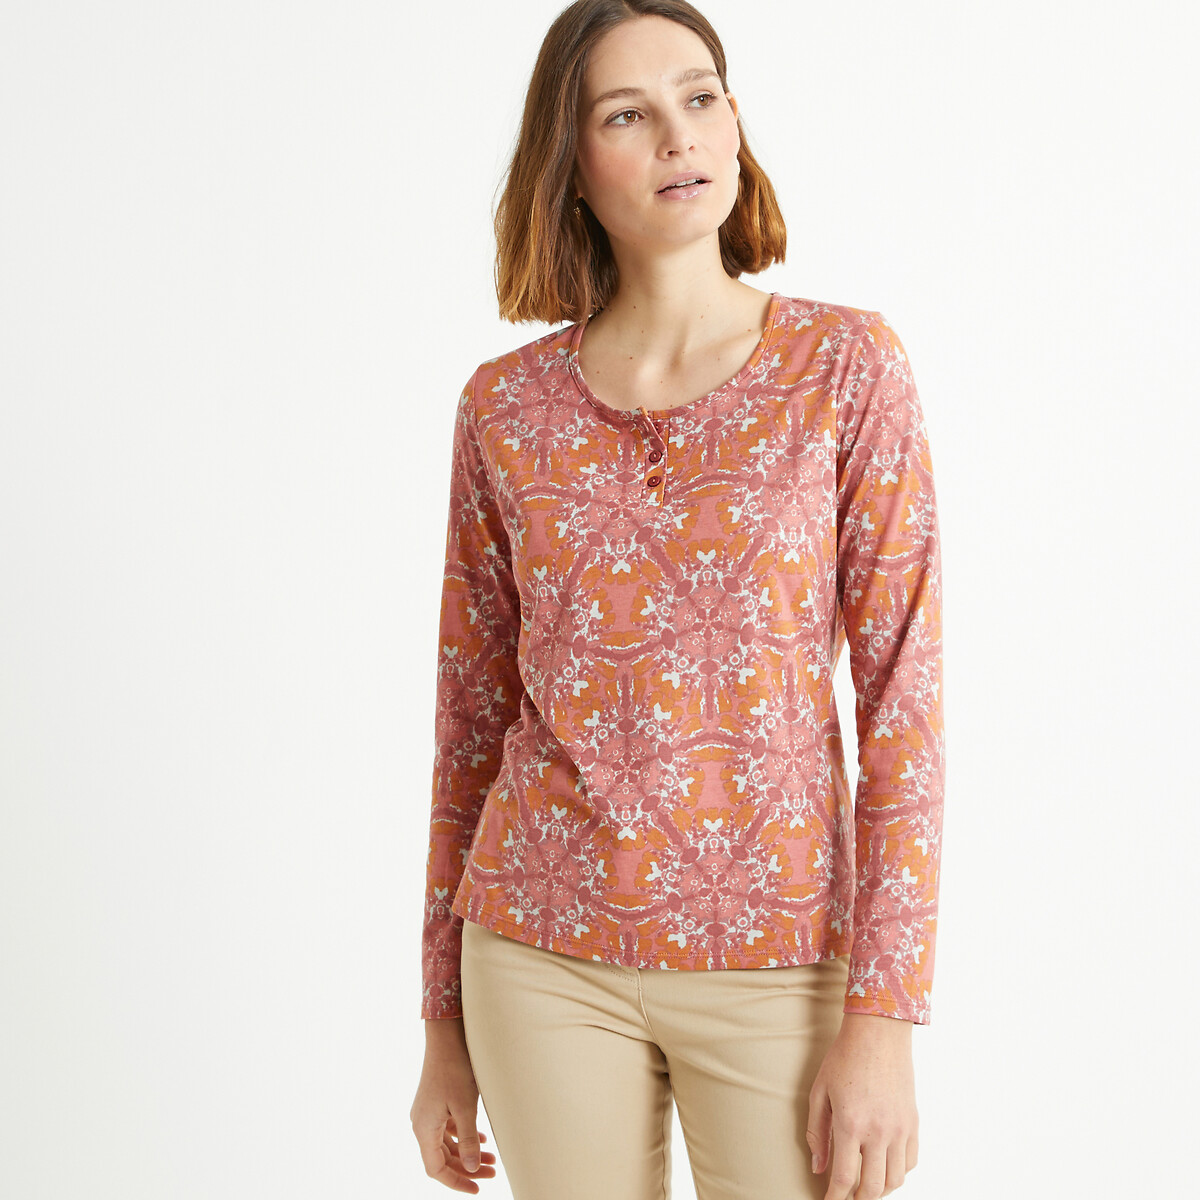 Image of Printed Cotton Mix T-Shirt with Crew Neck and Long Sleeves